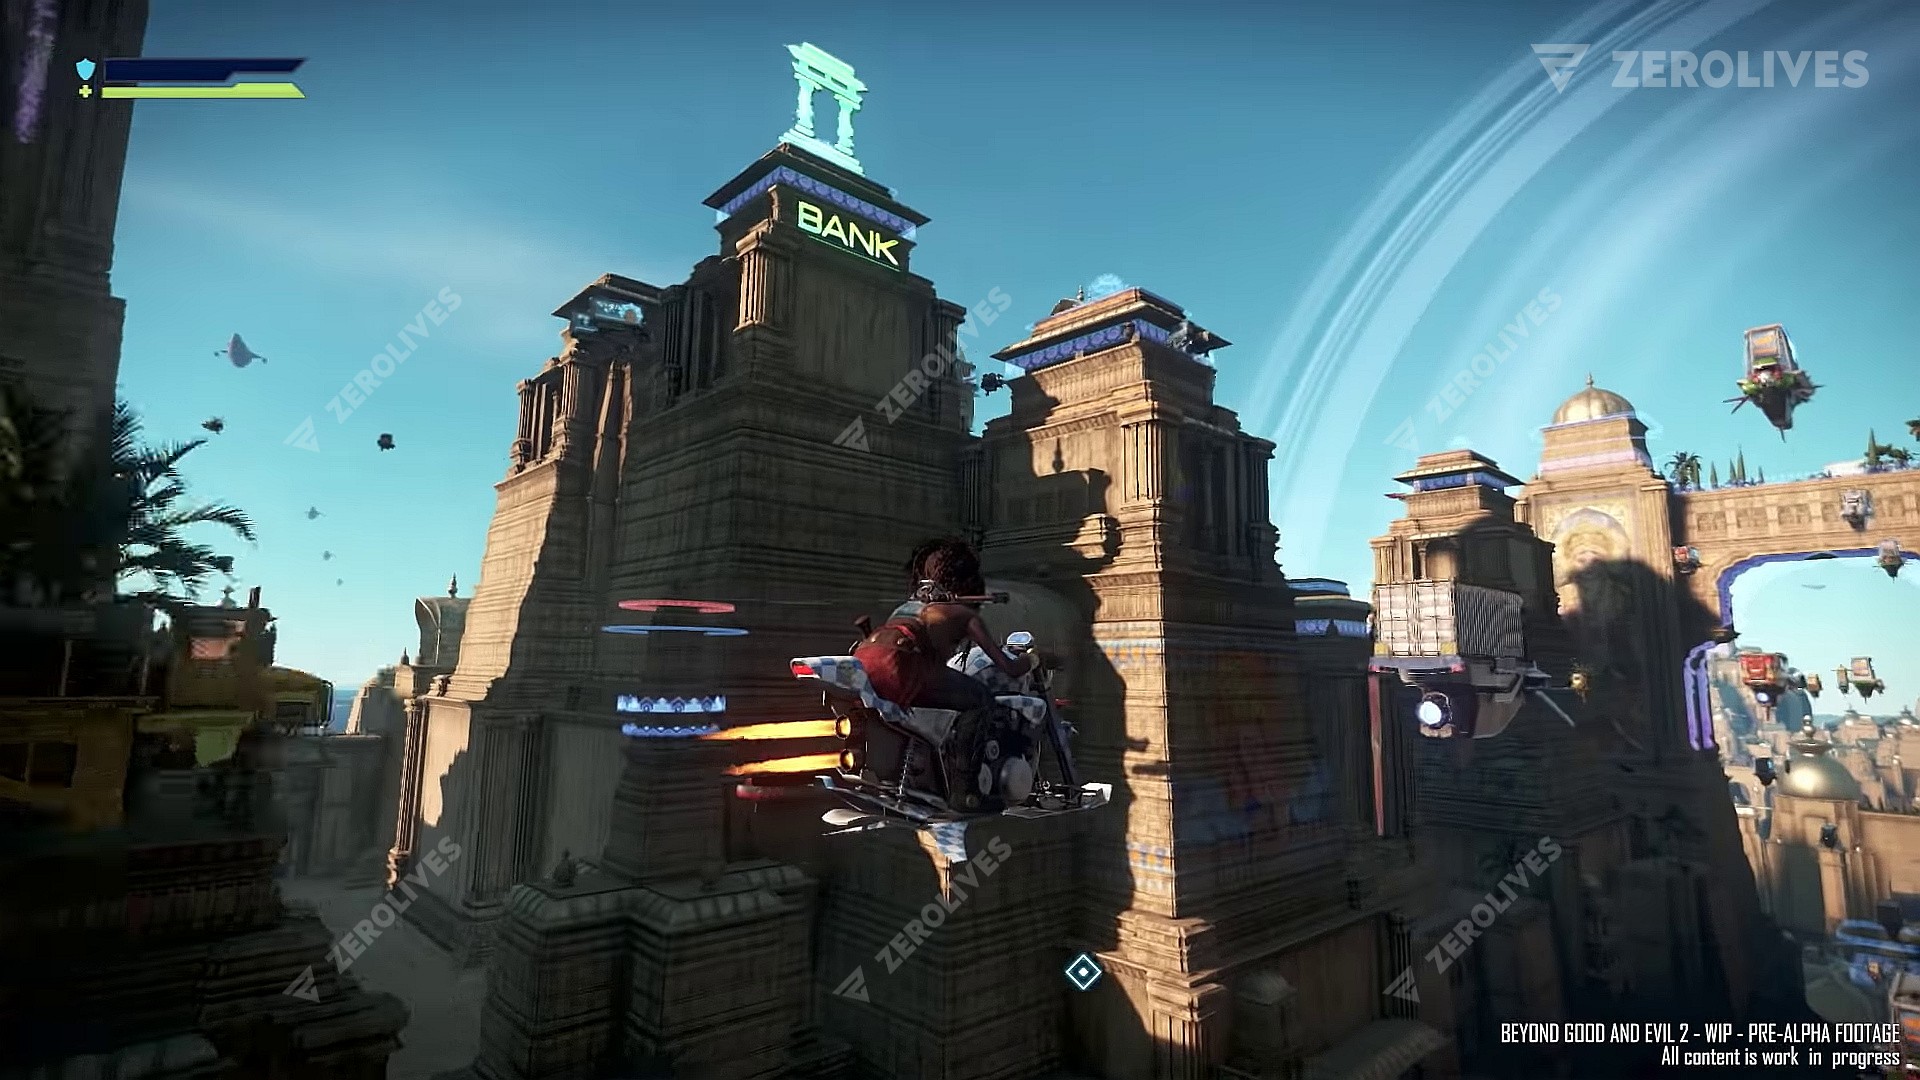 New Beyond Good And Evil 2 Gameplay Video Shows Augments Vehicles